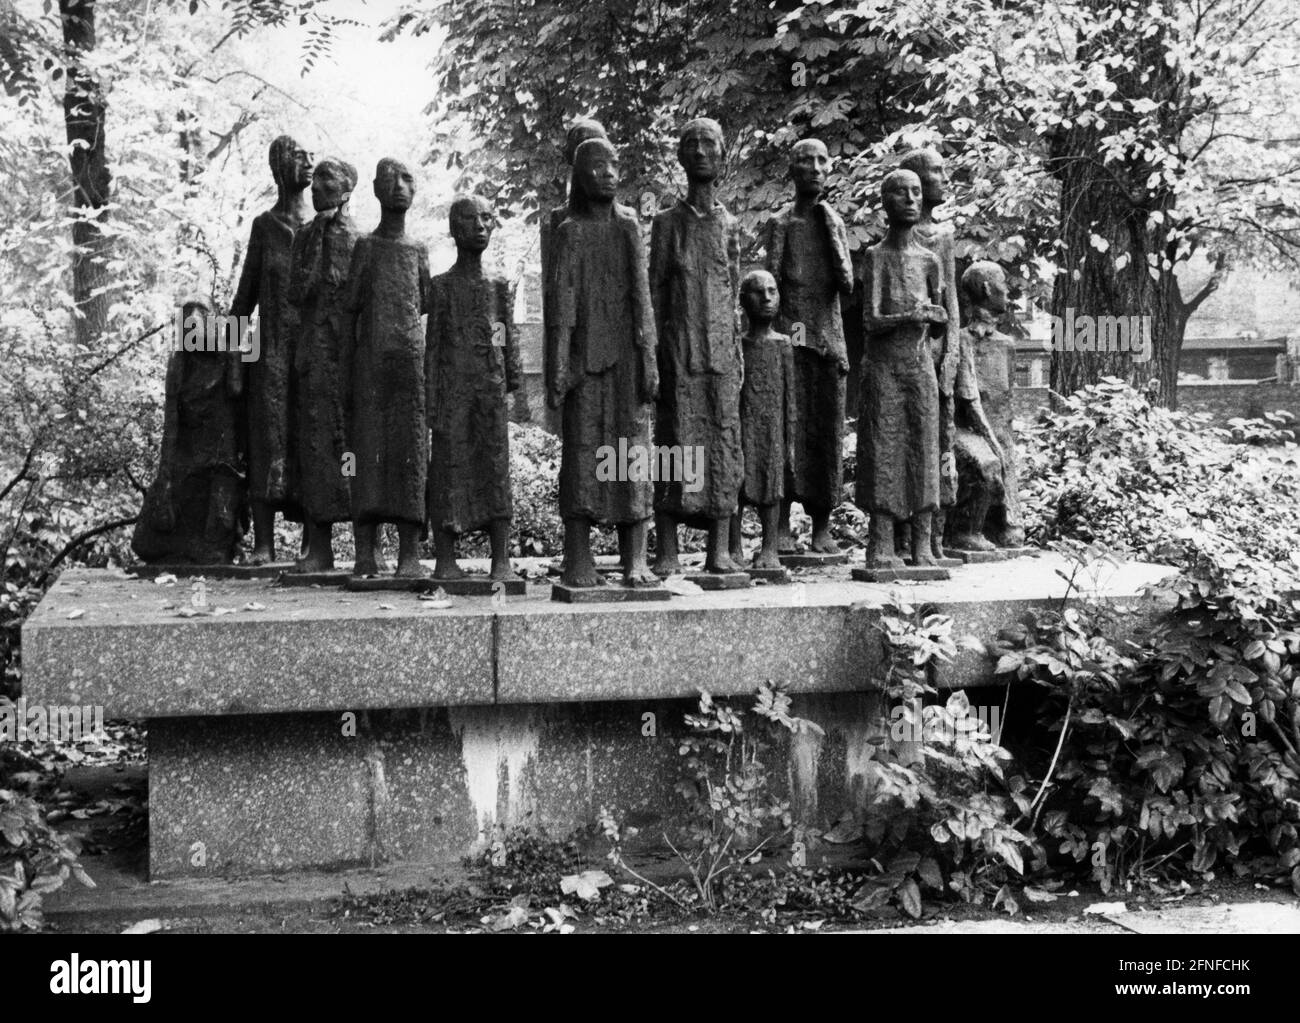 The group of figures on Große Hamburger Straße in Berlin commemorates the Jews deported from here to the Auschwitz and Theresienstadt concentration camps. The National Socialists used the retirement home of the Jewish community located here as a collection point for the Jewish citizens of Berlin. The memorial has stood at this site since 1984. [automated translation] Stock Photo